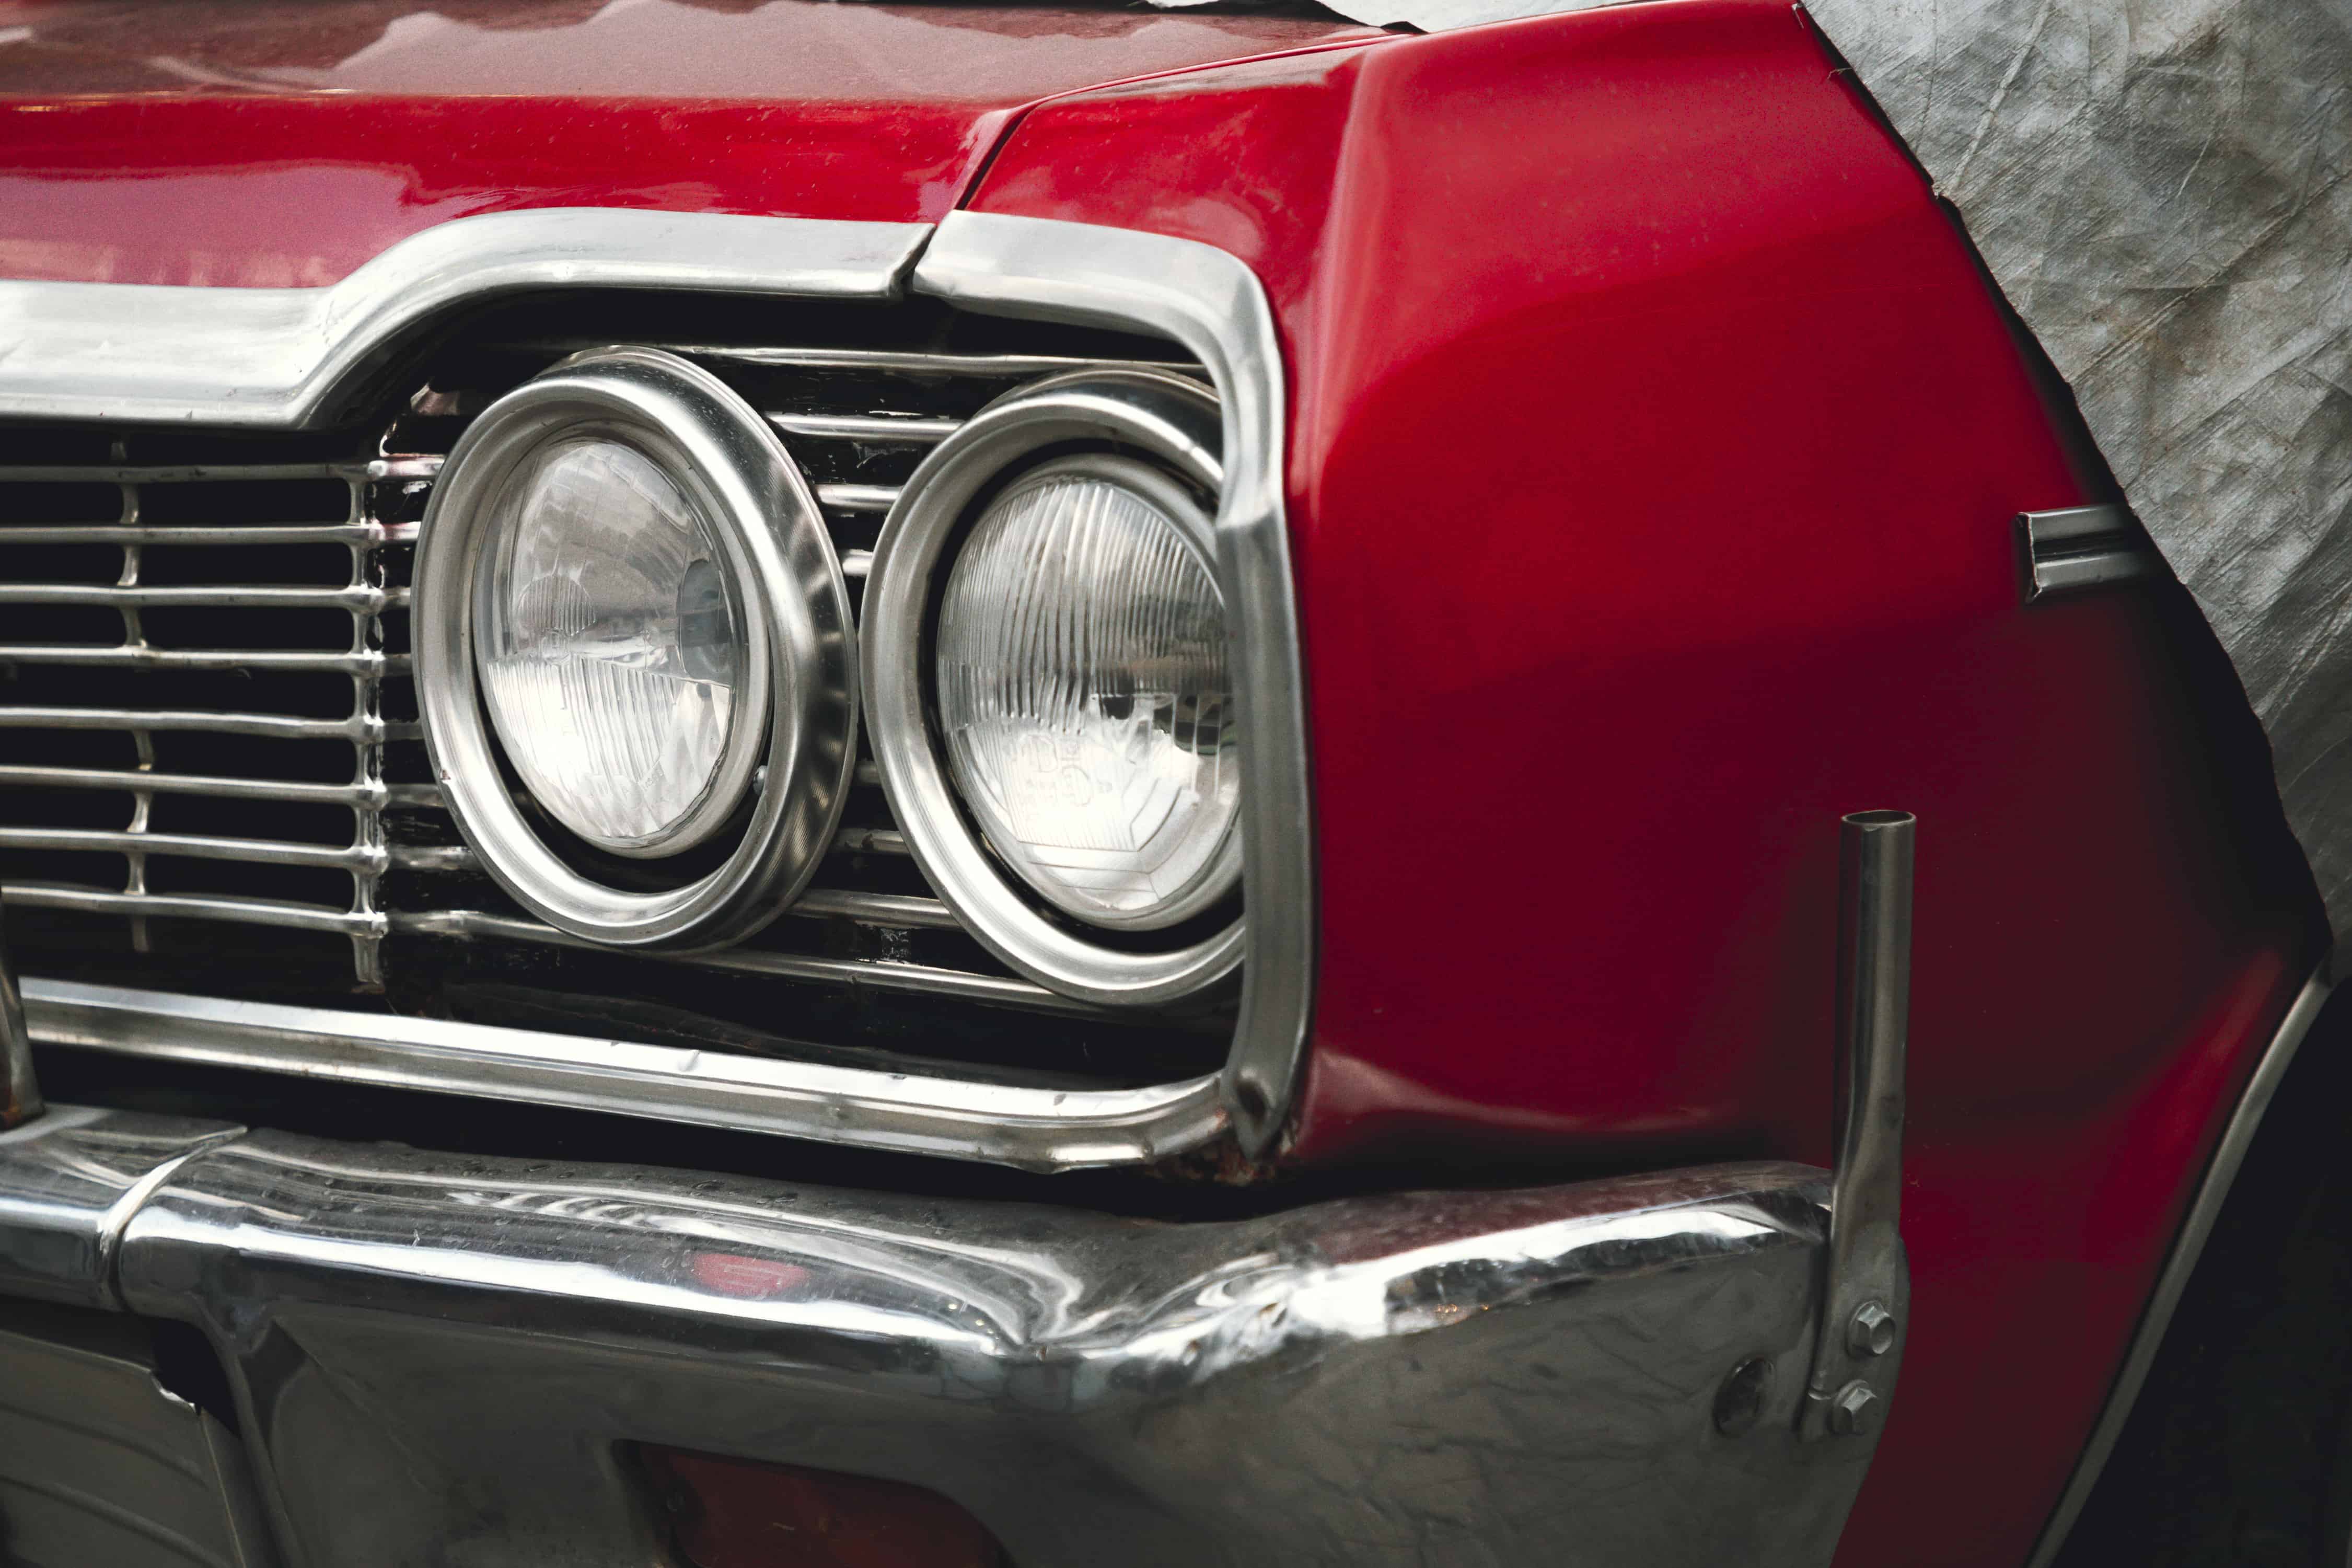 10 things to check before bringing your classic car out of storage